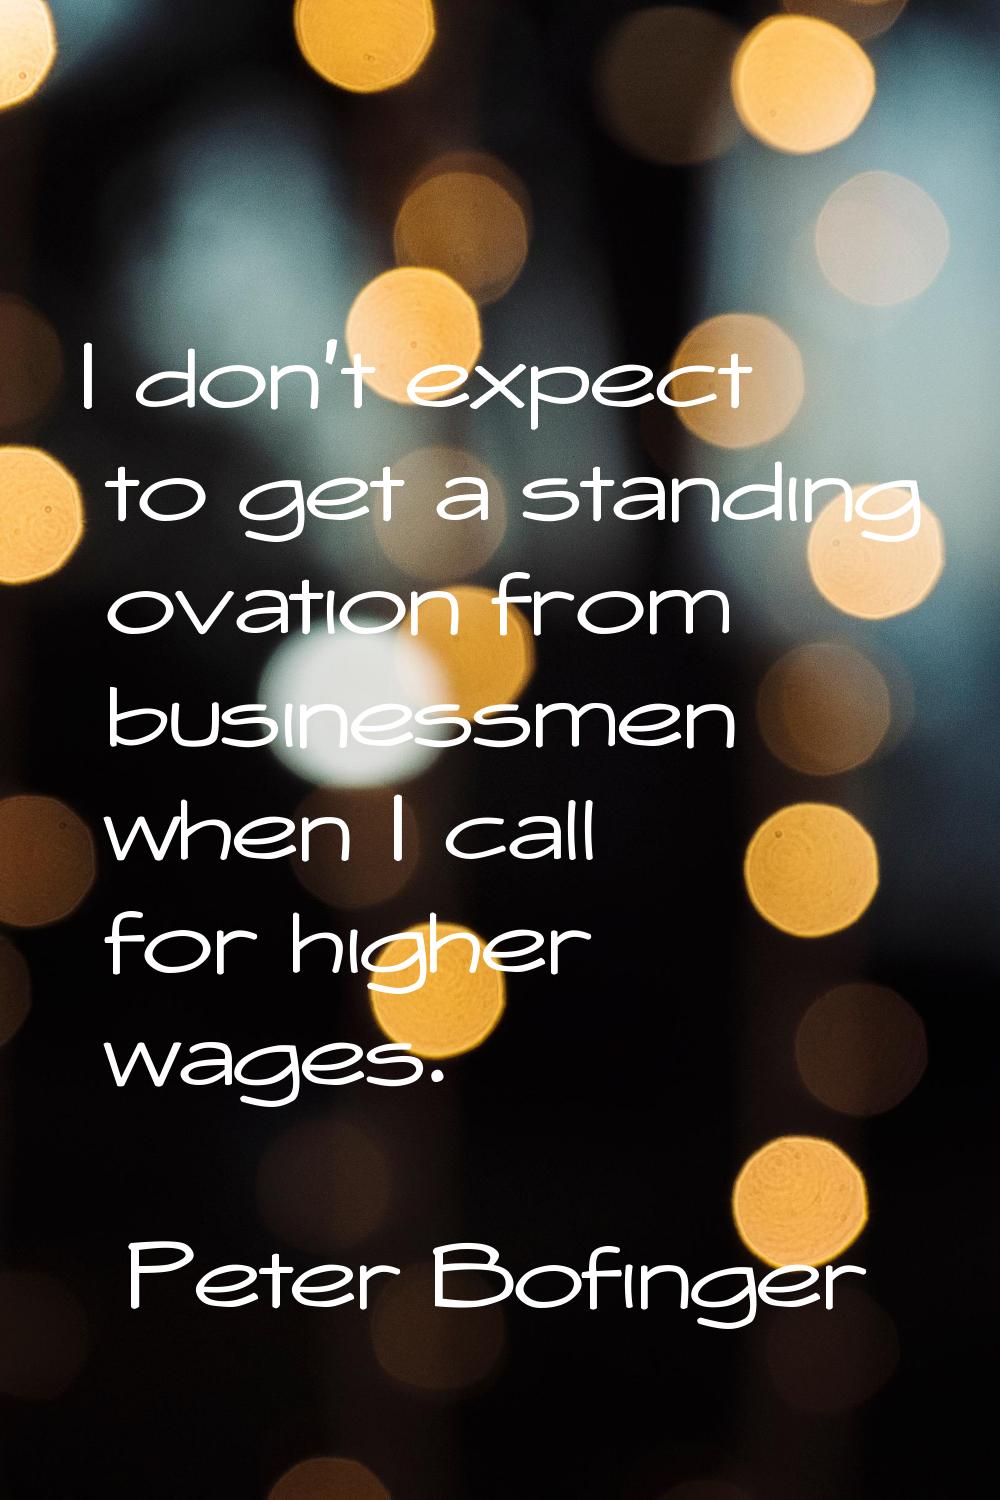 I don't expect to get a standing ovation from businessmen when I call for higher wages.